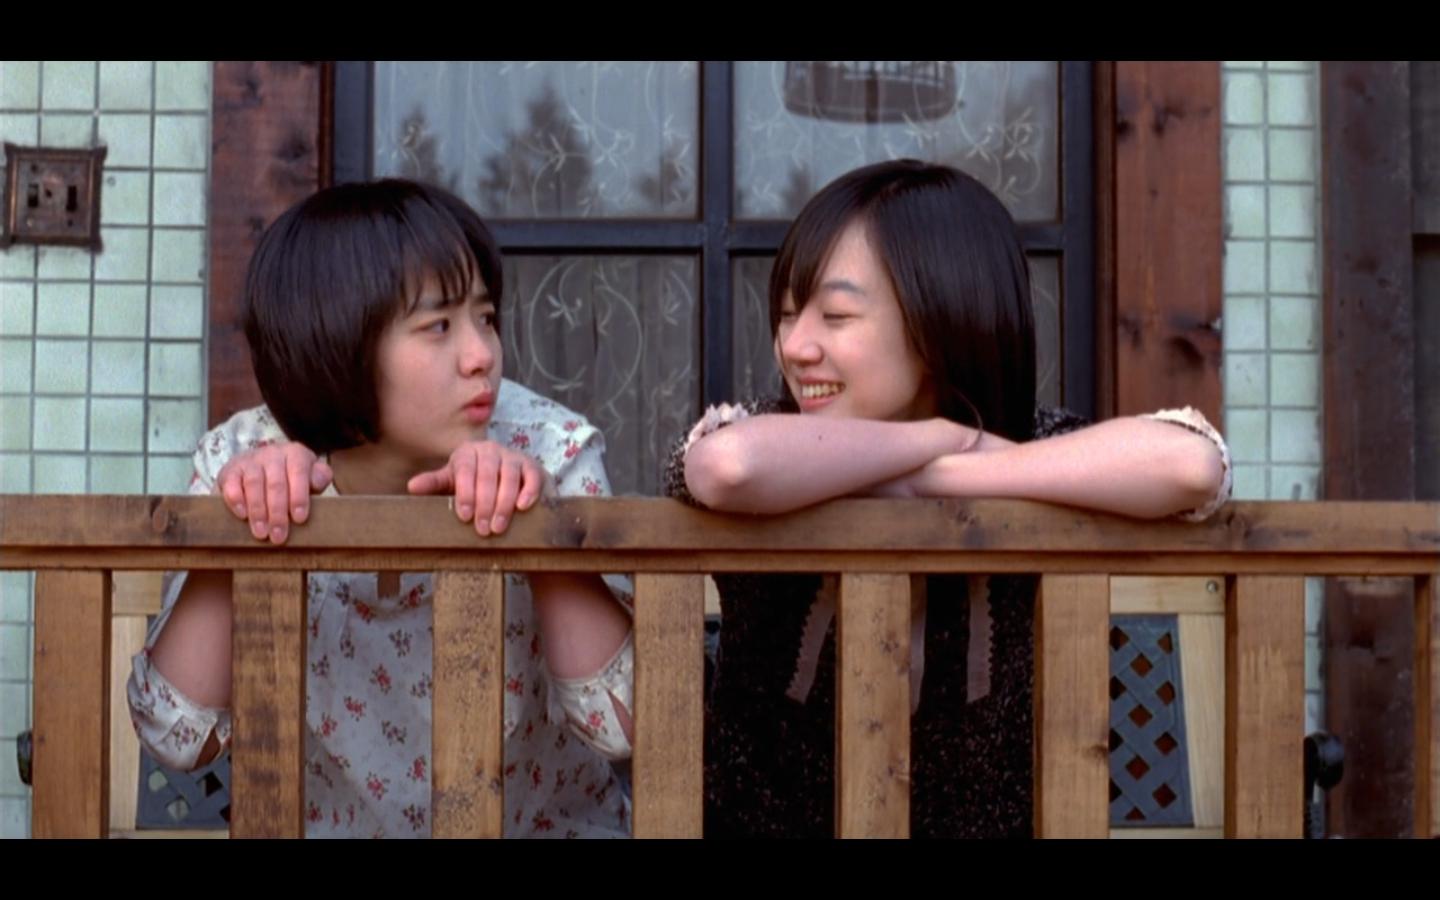 A Tale of Two Sisters (2003)